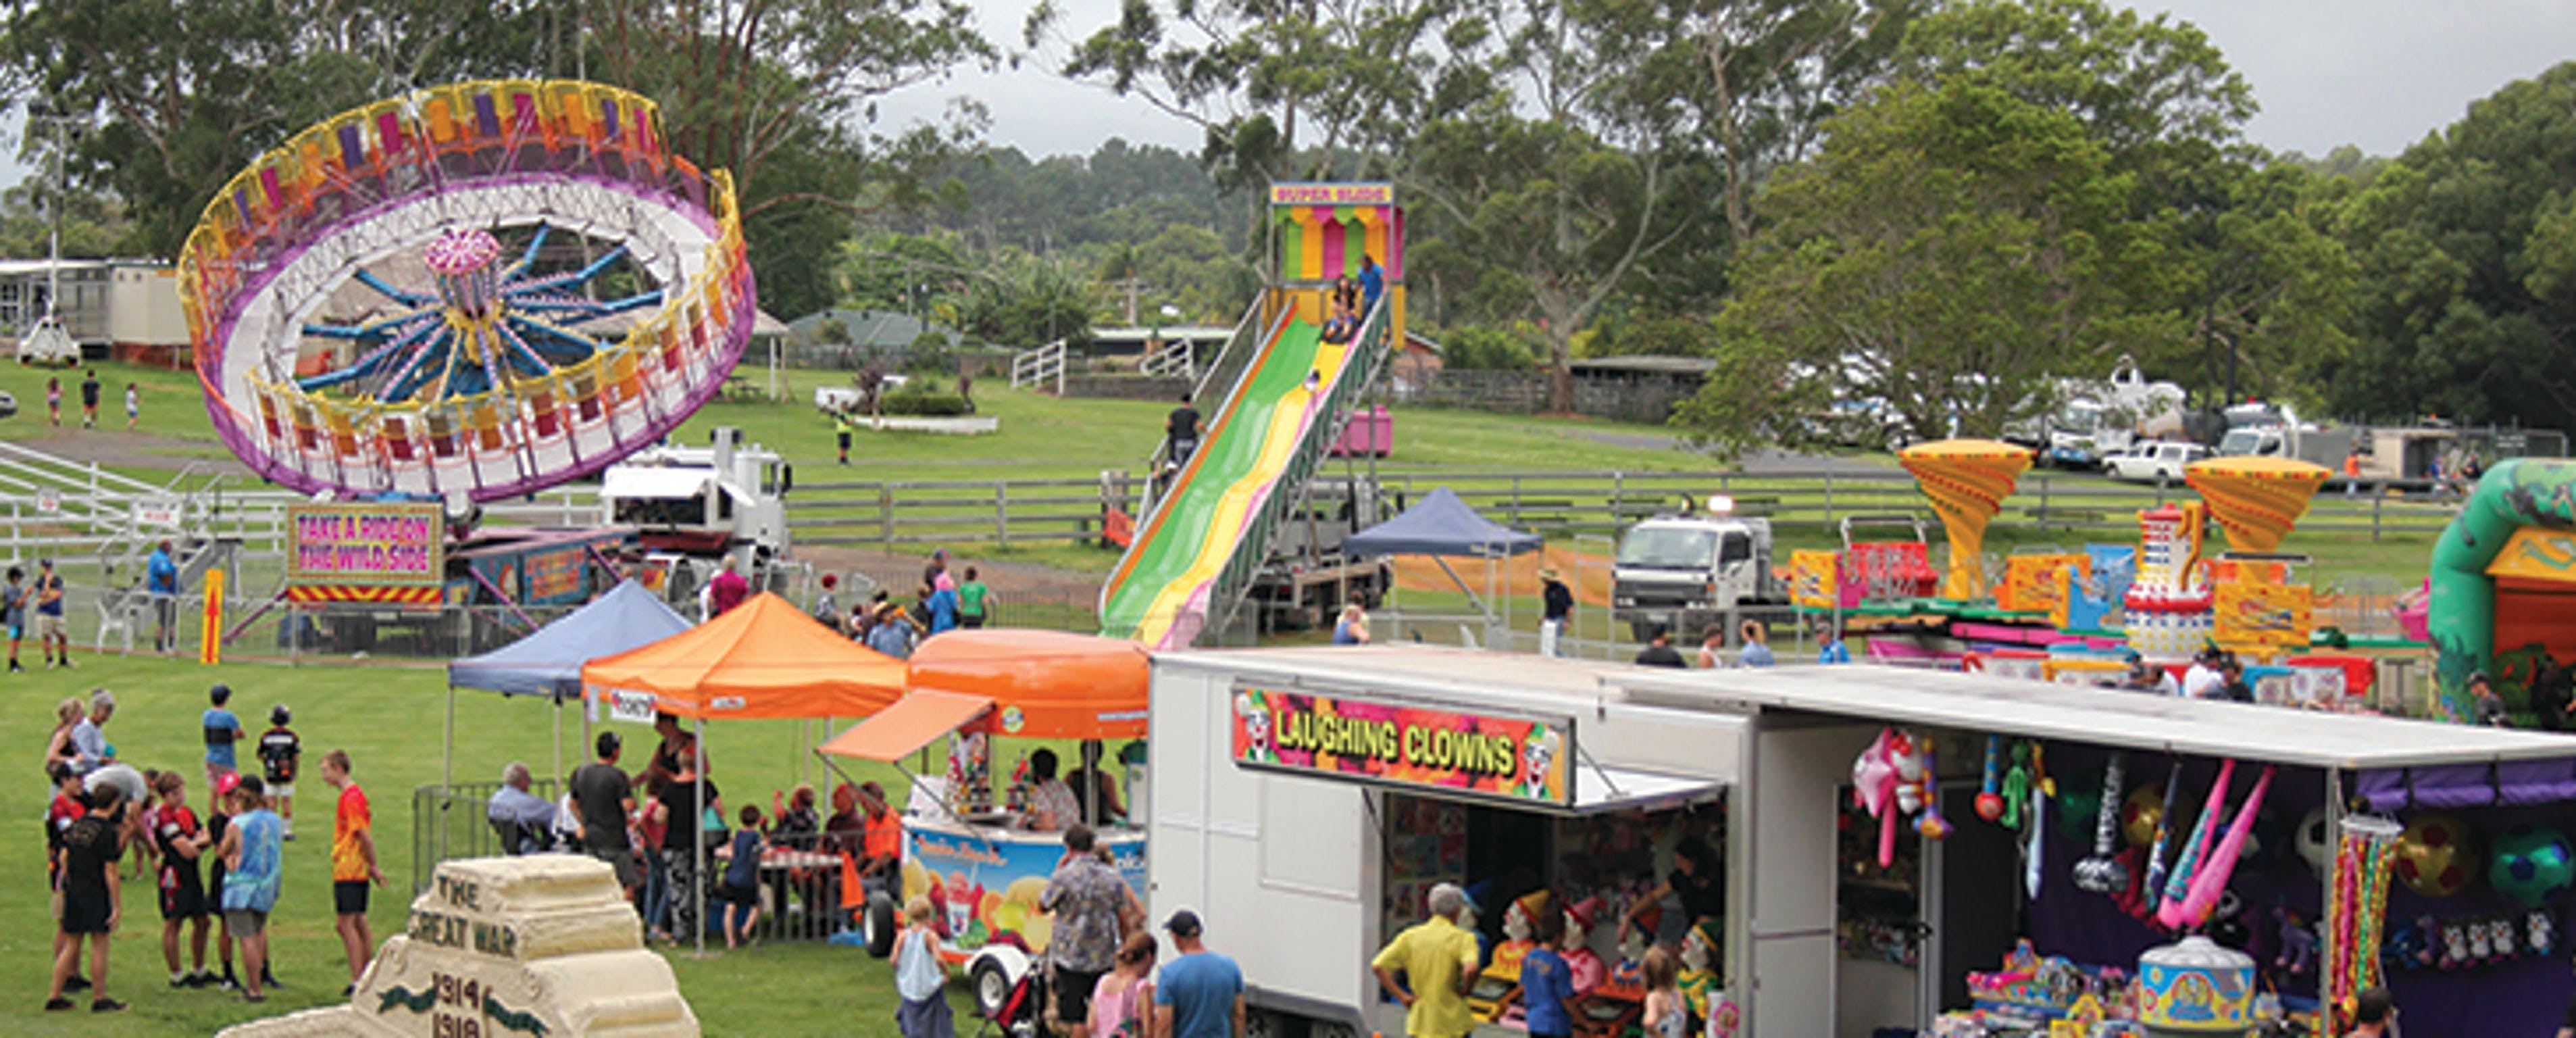 Alstonville Agricultural Society Show - Surfers Gold Coast